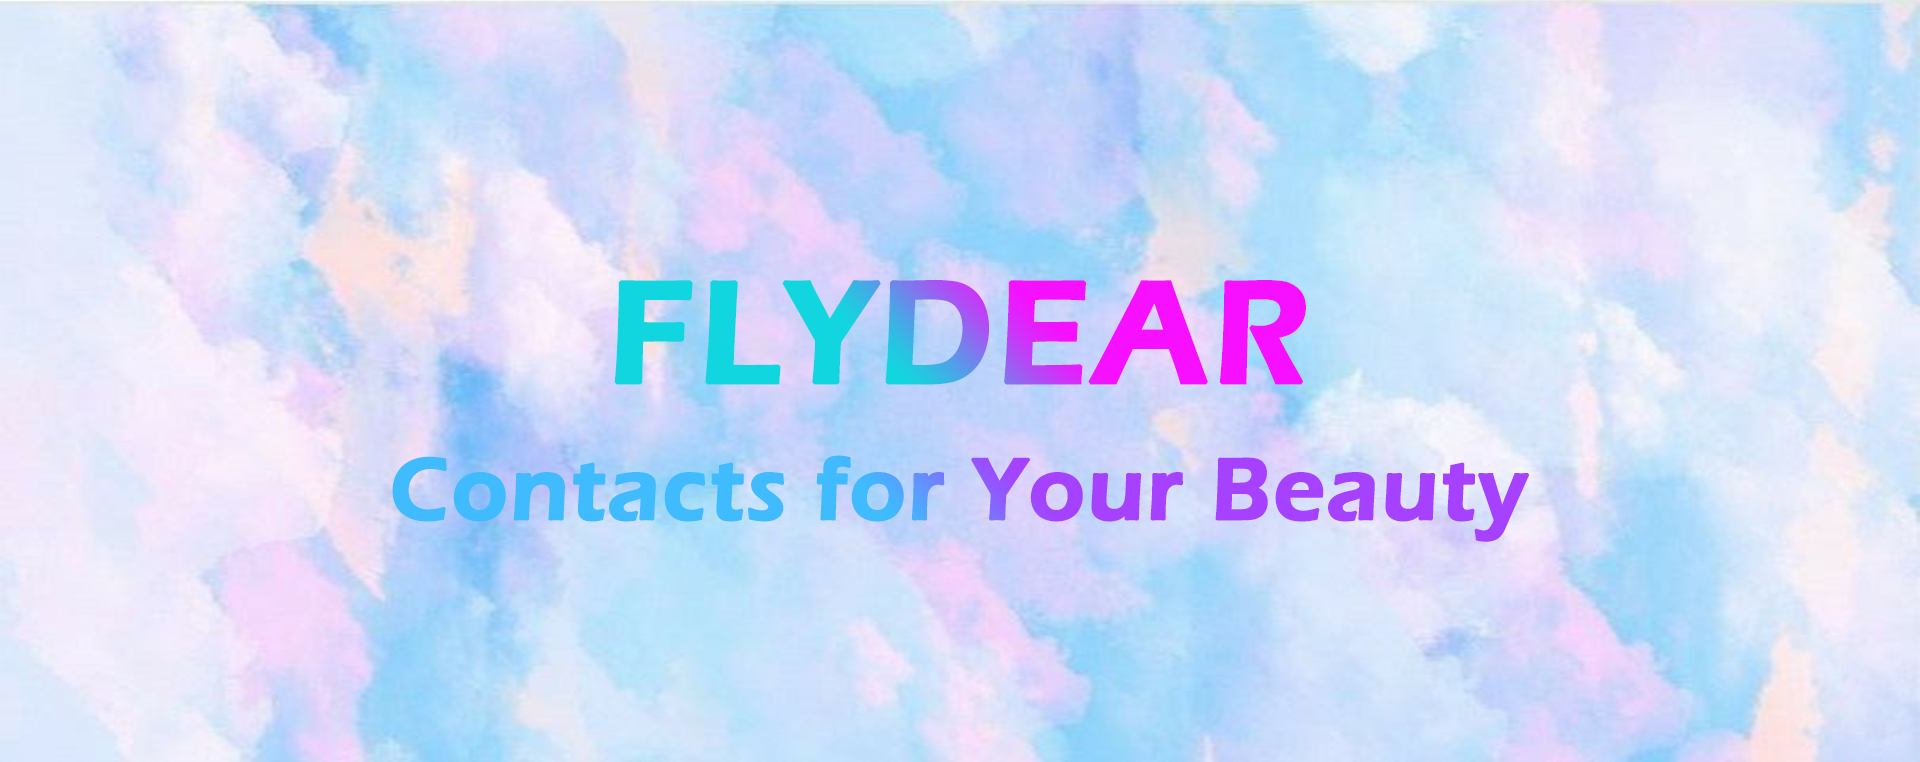 FlyDear Colored Contacts Yearly, 6 Months, 3 Months, Monthly, Weekly, Daily